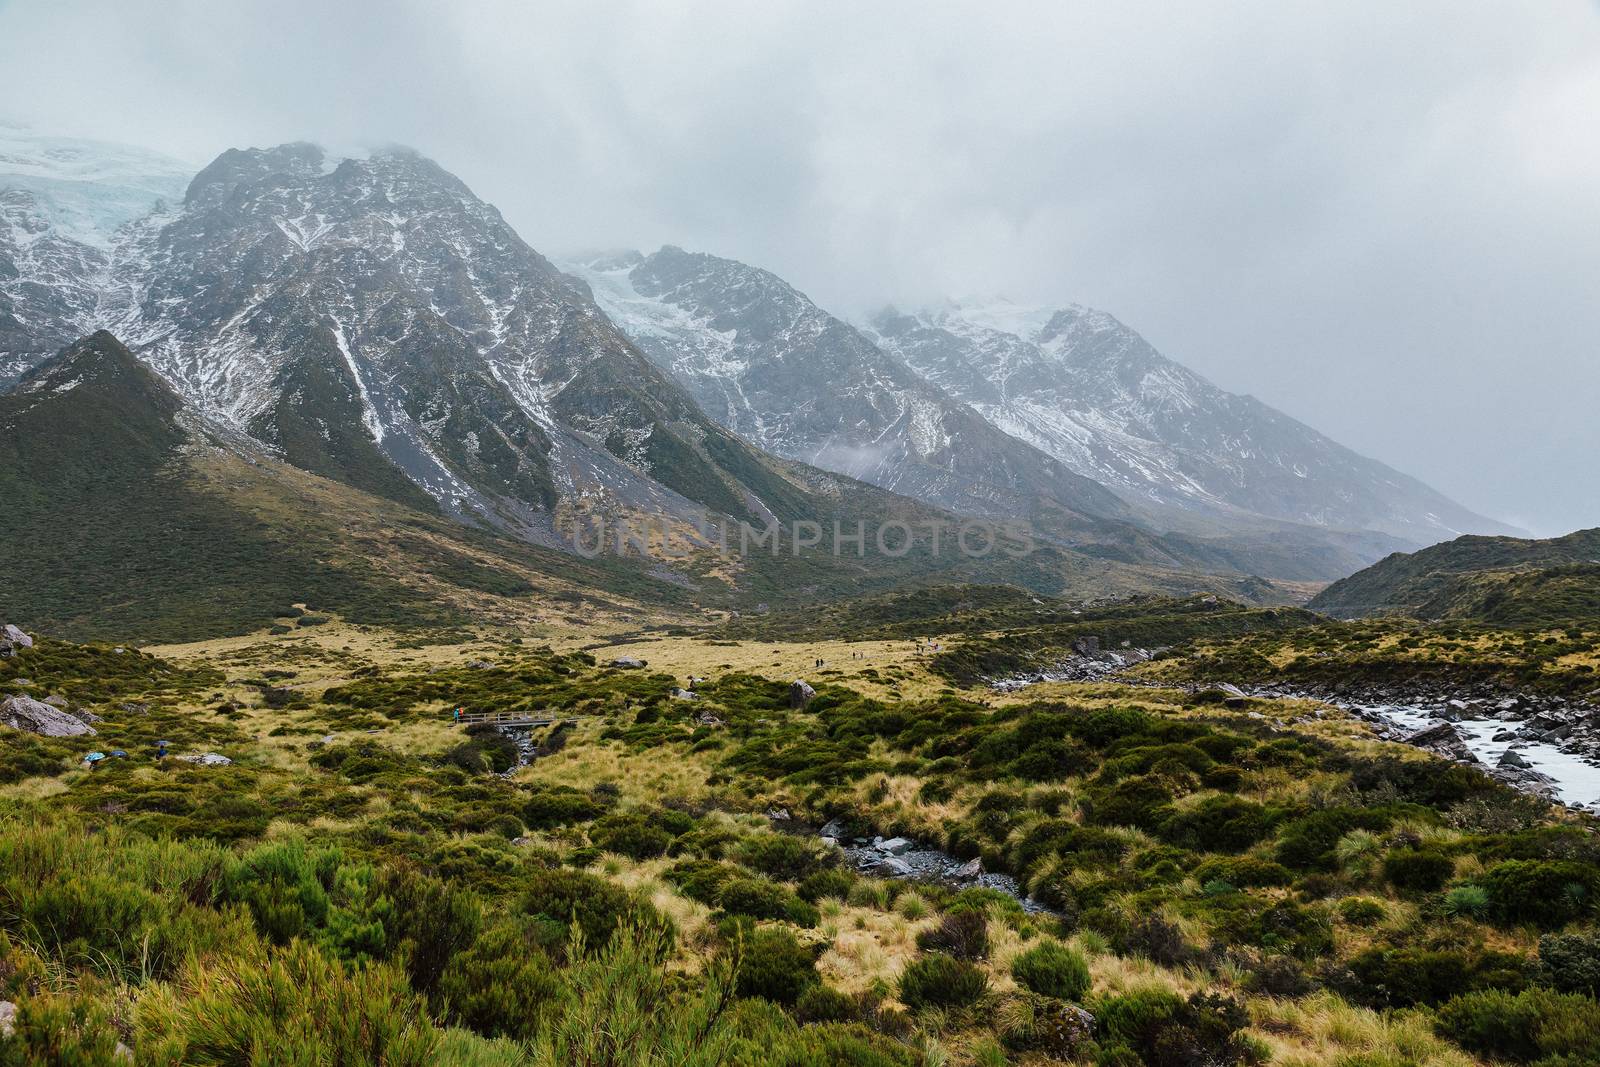 Hooker Valley Track hiking trail, New Zealand. View of Aoraki Mount Cook National Park with snow capped mountains.